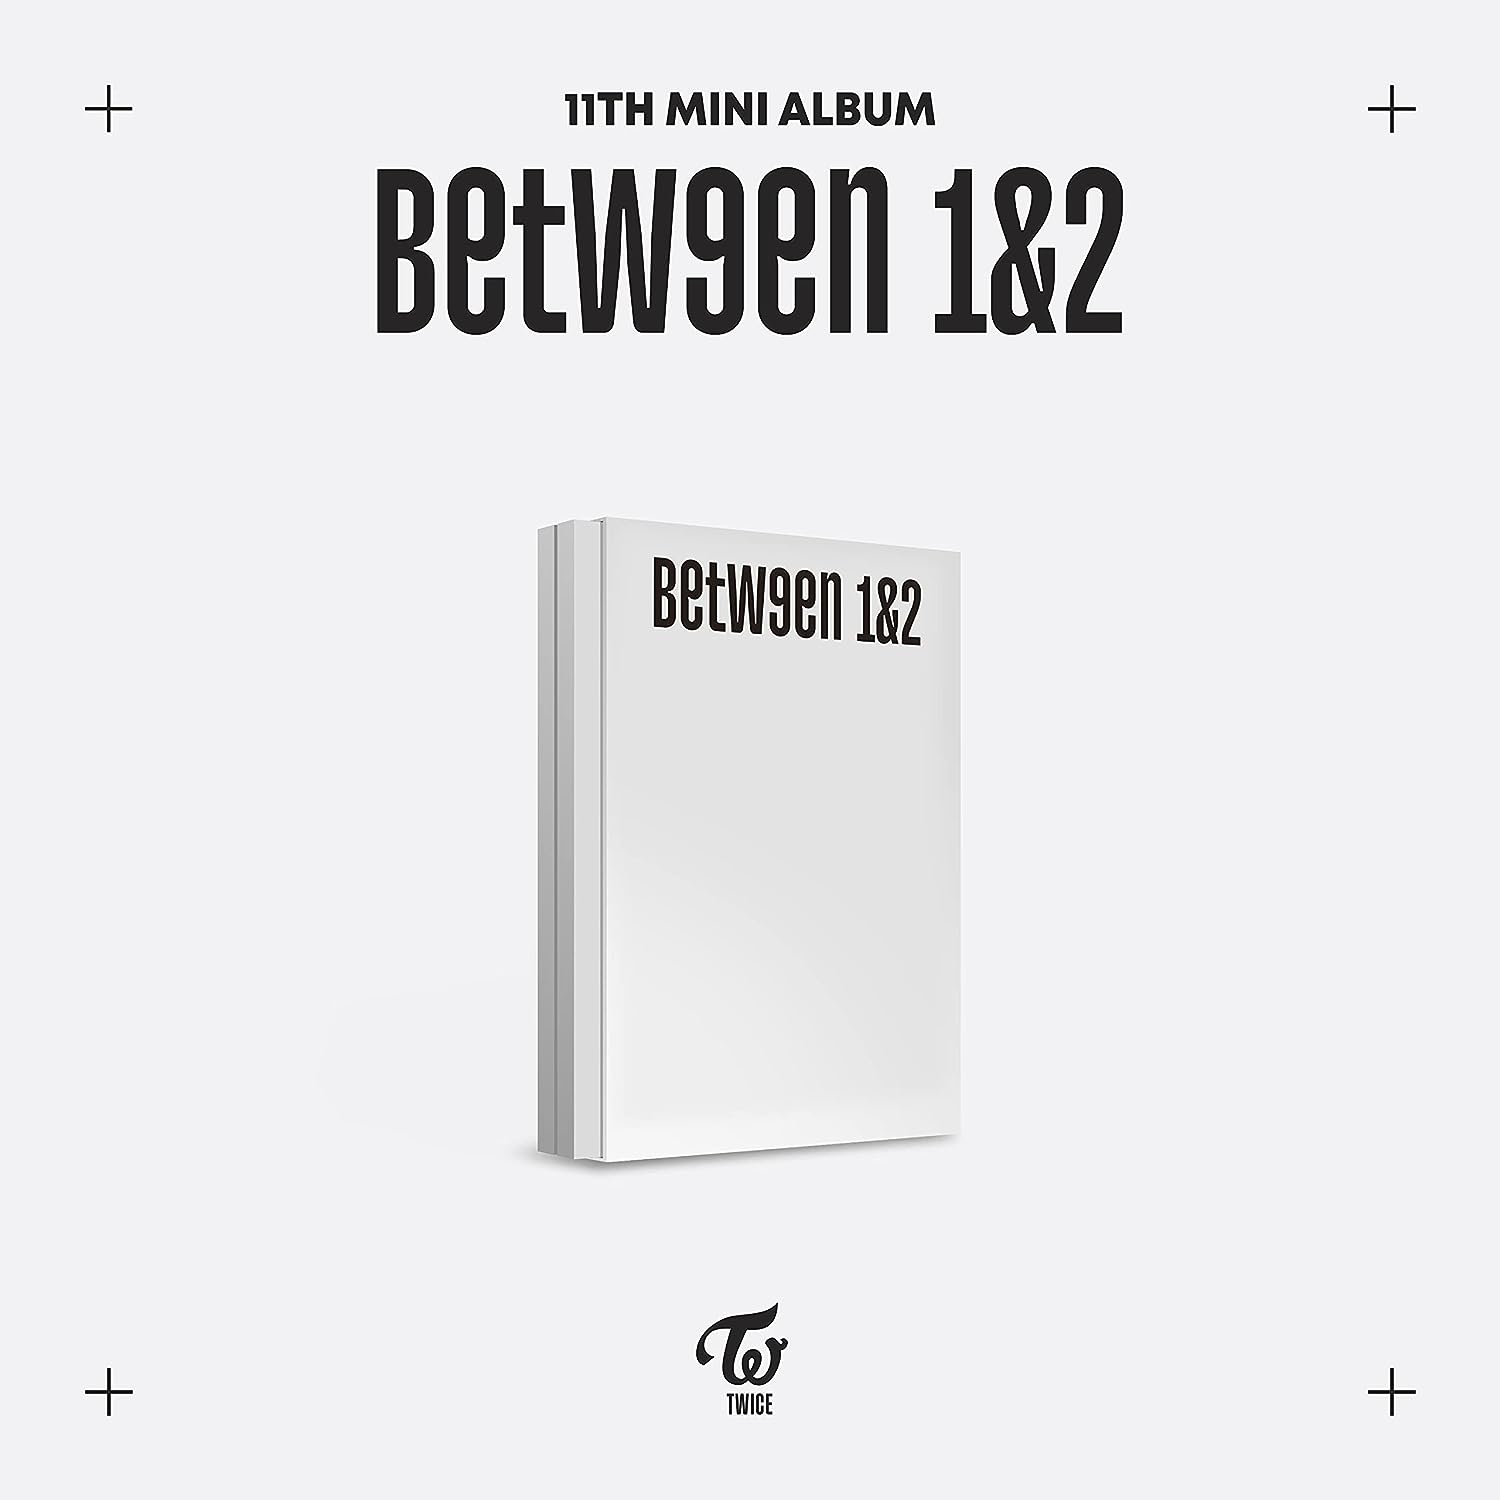 TWICE 11TH MINI ALBUM 'BETWEEN 1&2' CRYPTOGRAPHY VERSION COVER